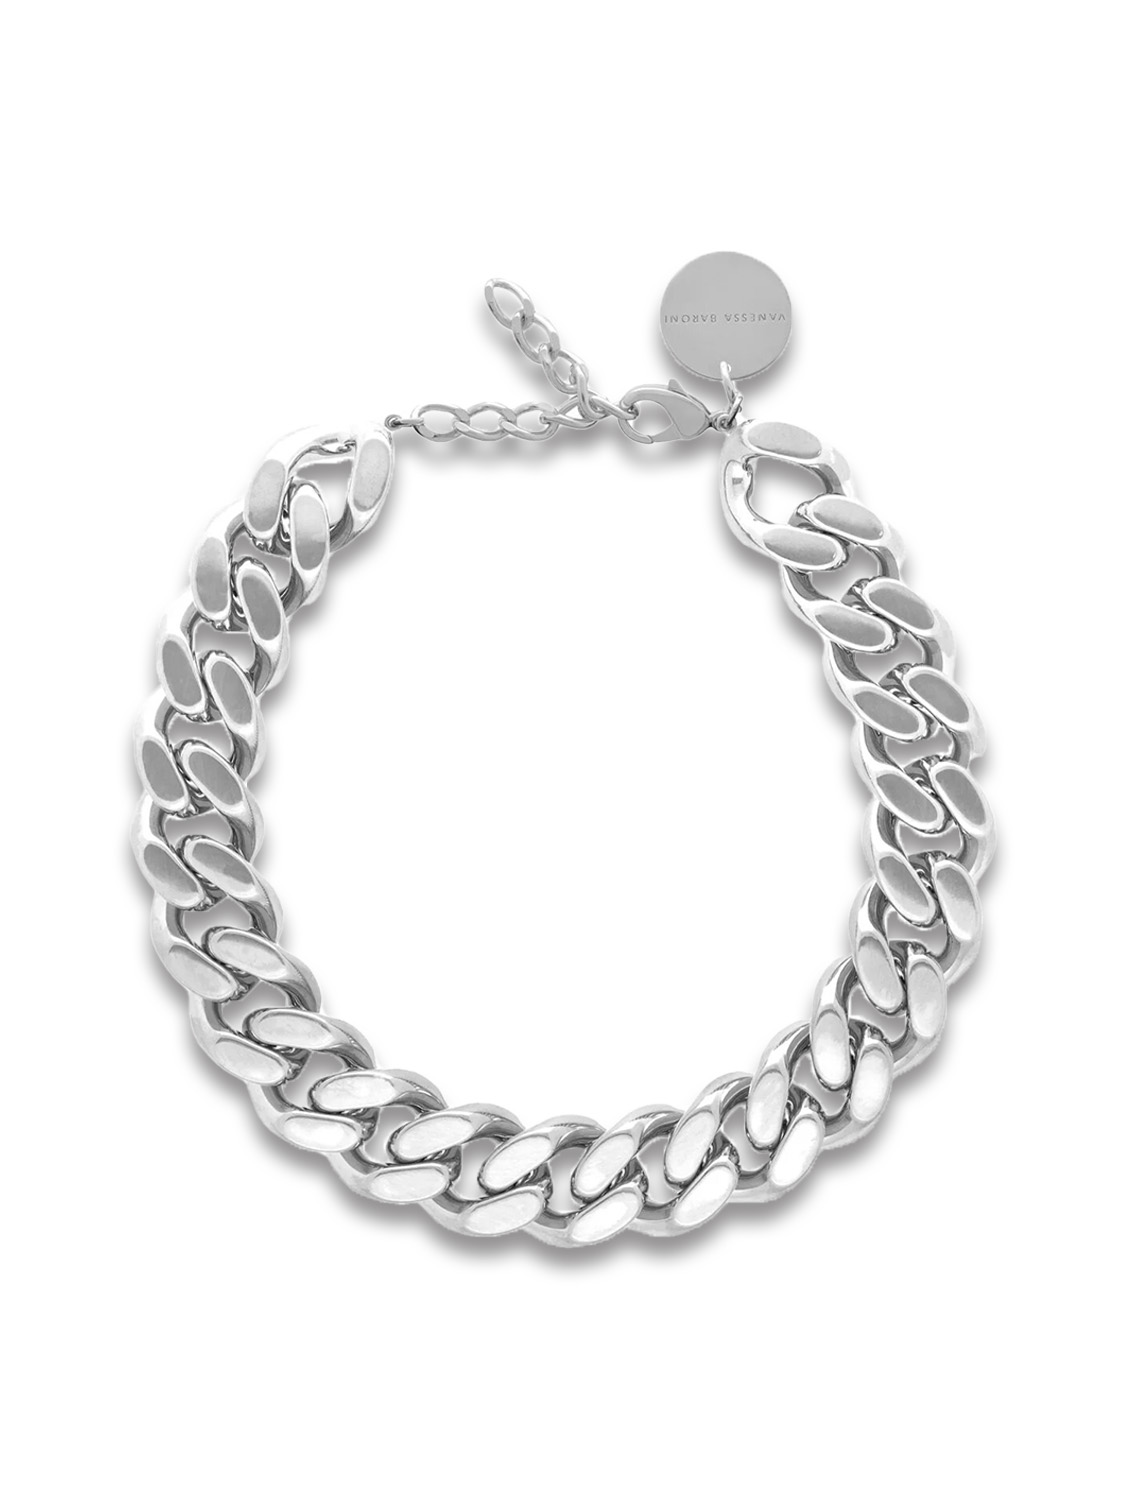 Flat Chain Necklace - Necklace made of flat armor chains